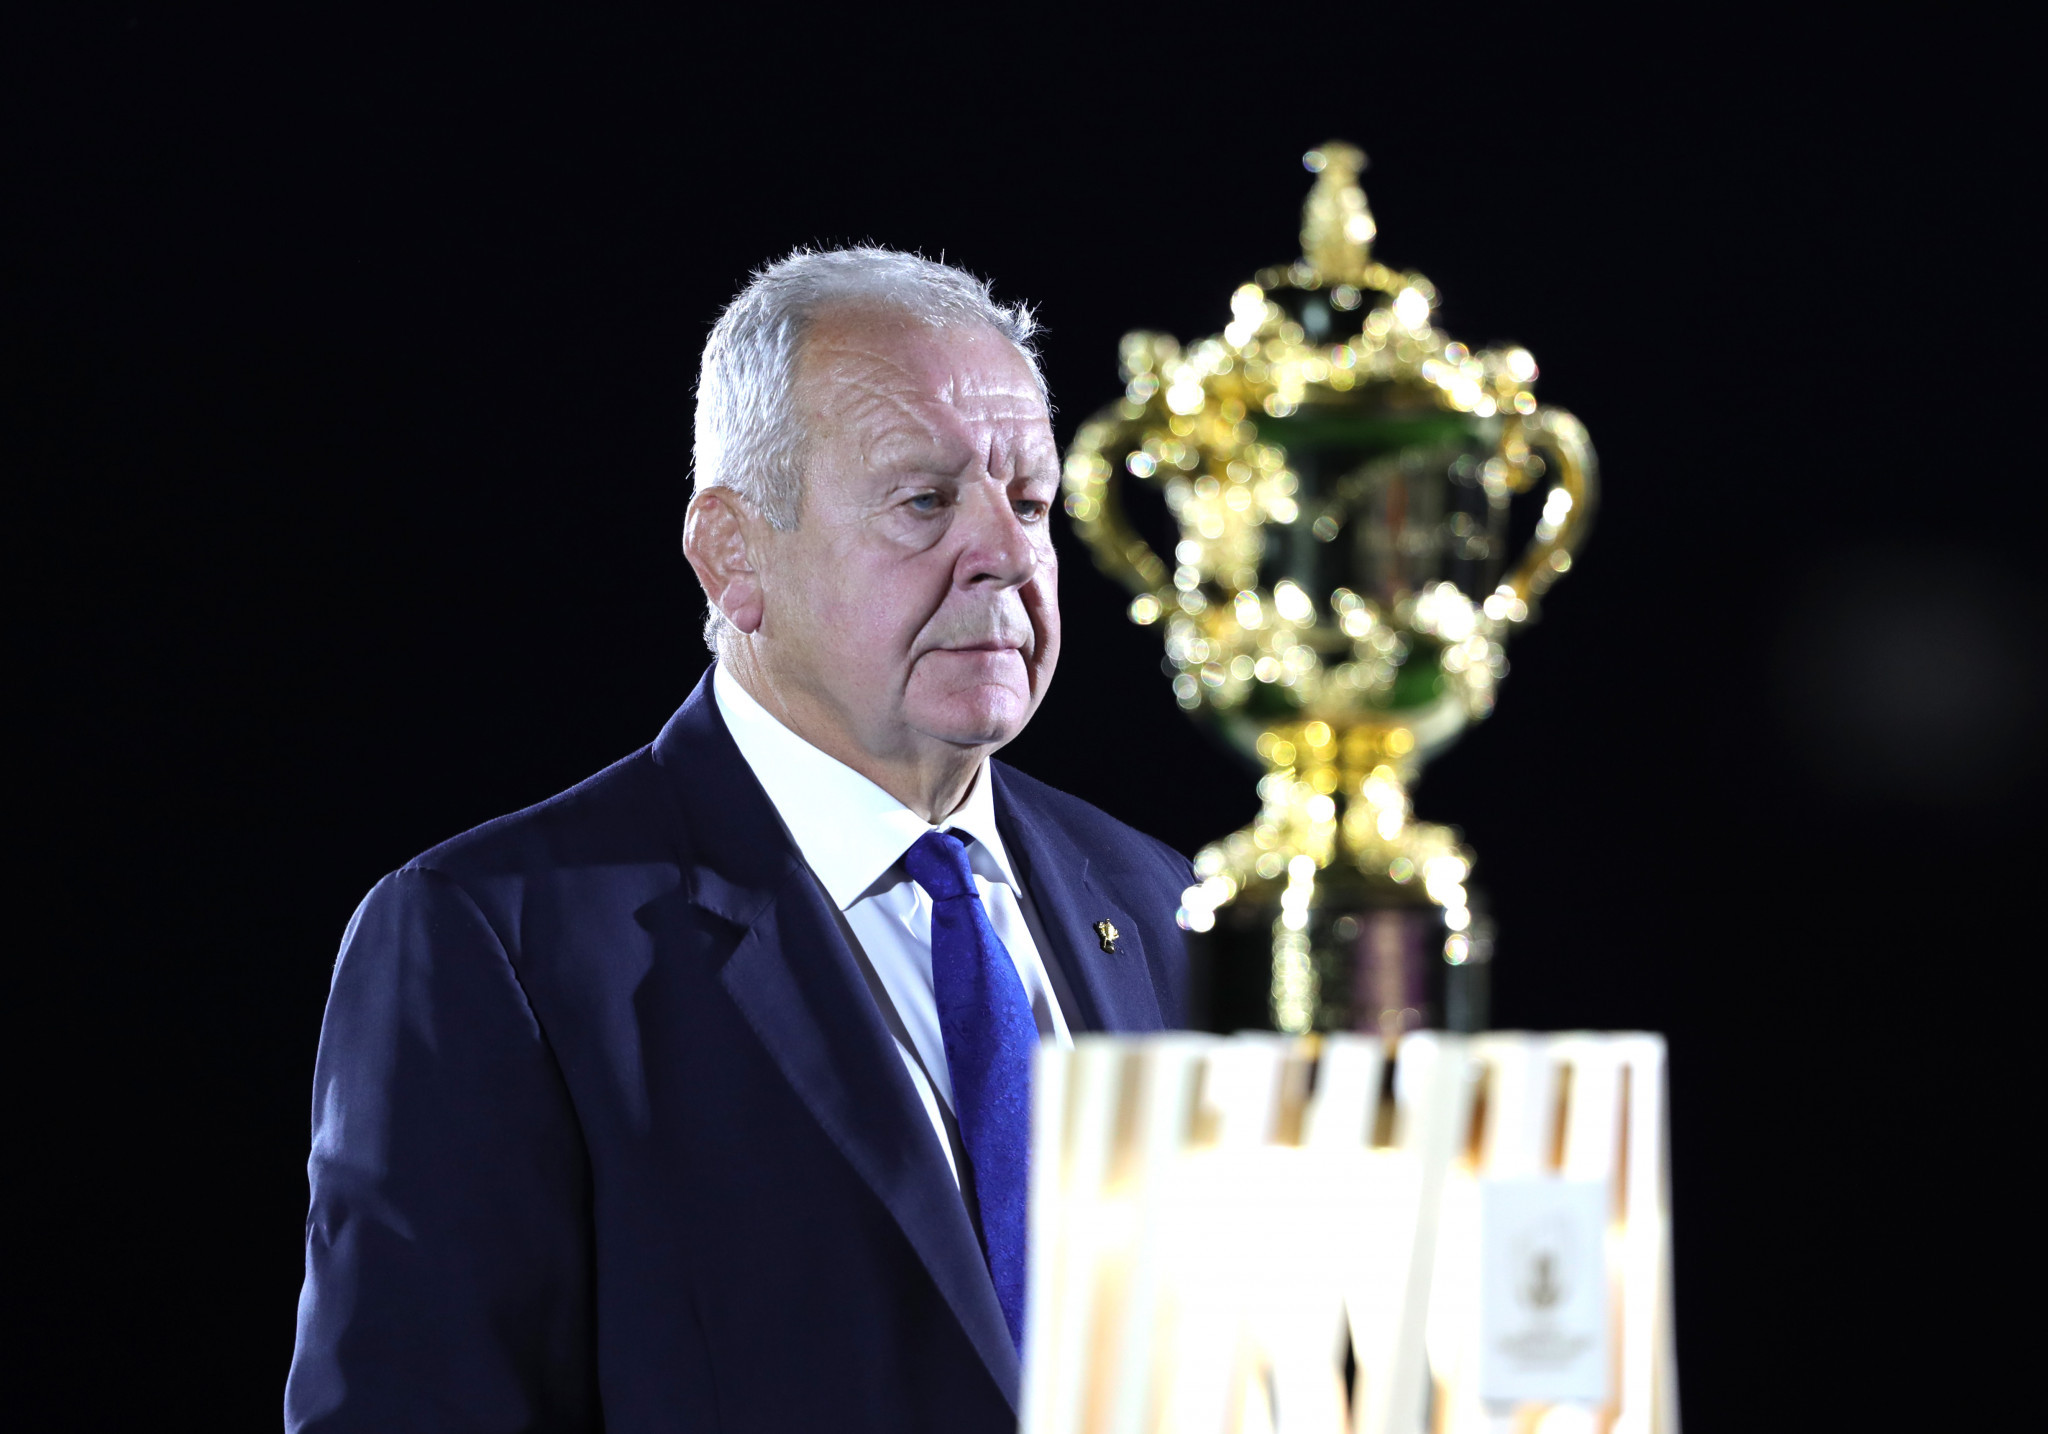 World Rugby chairman aims to "reunite our game" in face of coronavirus concerns